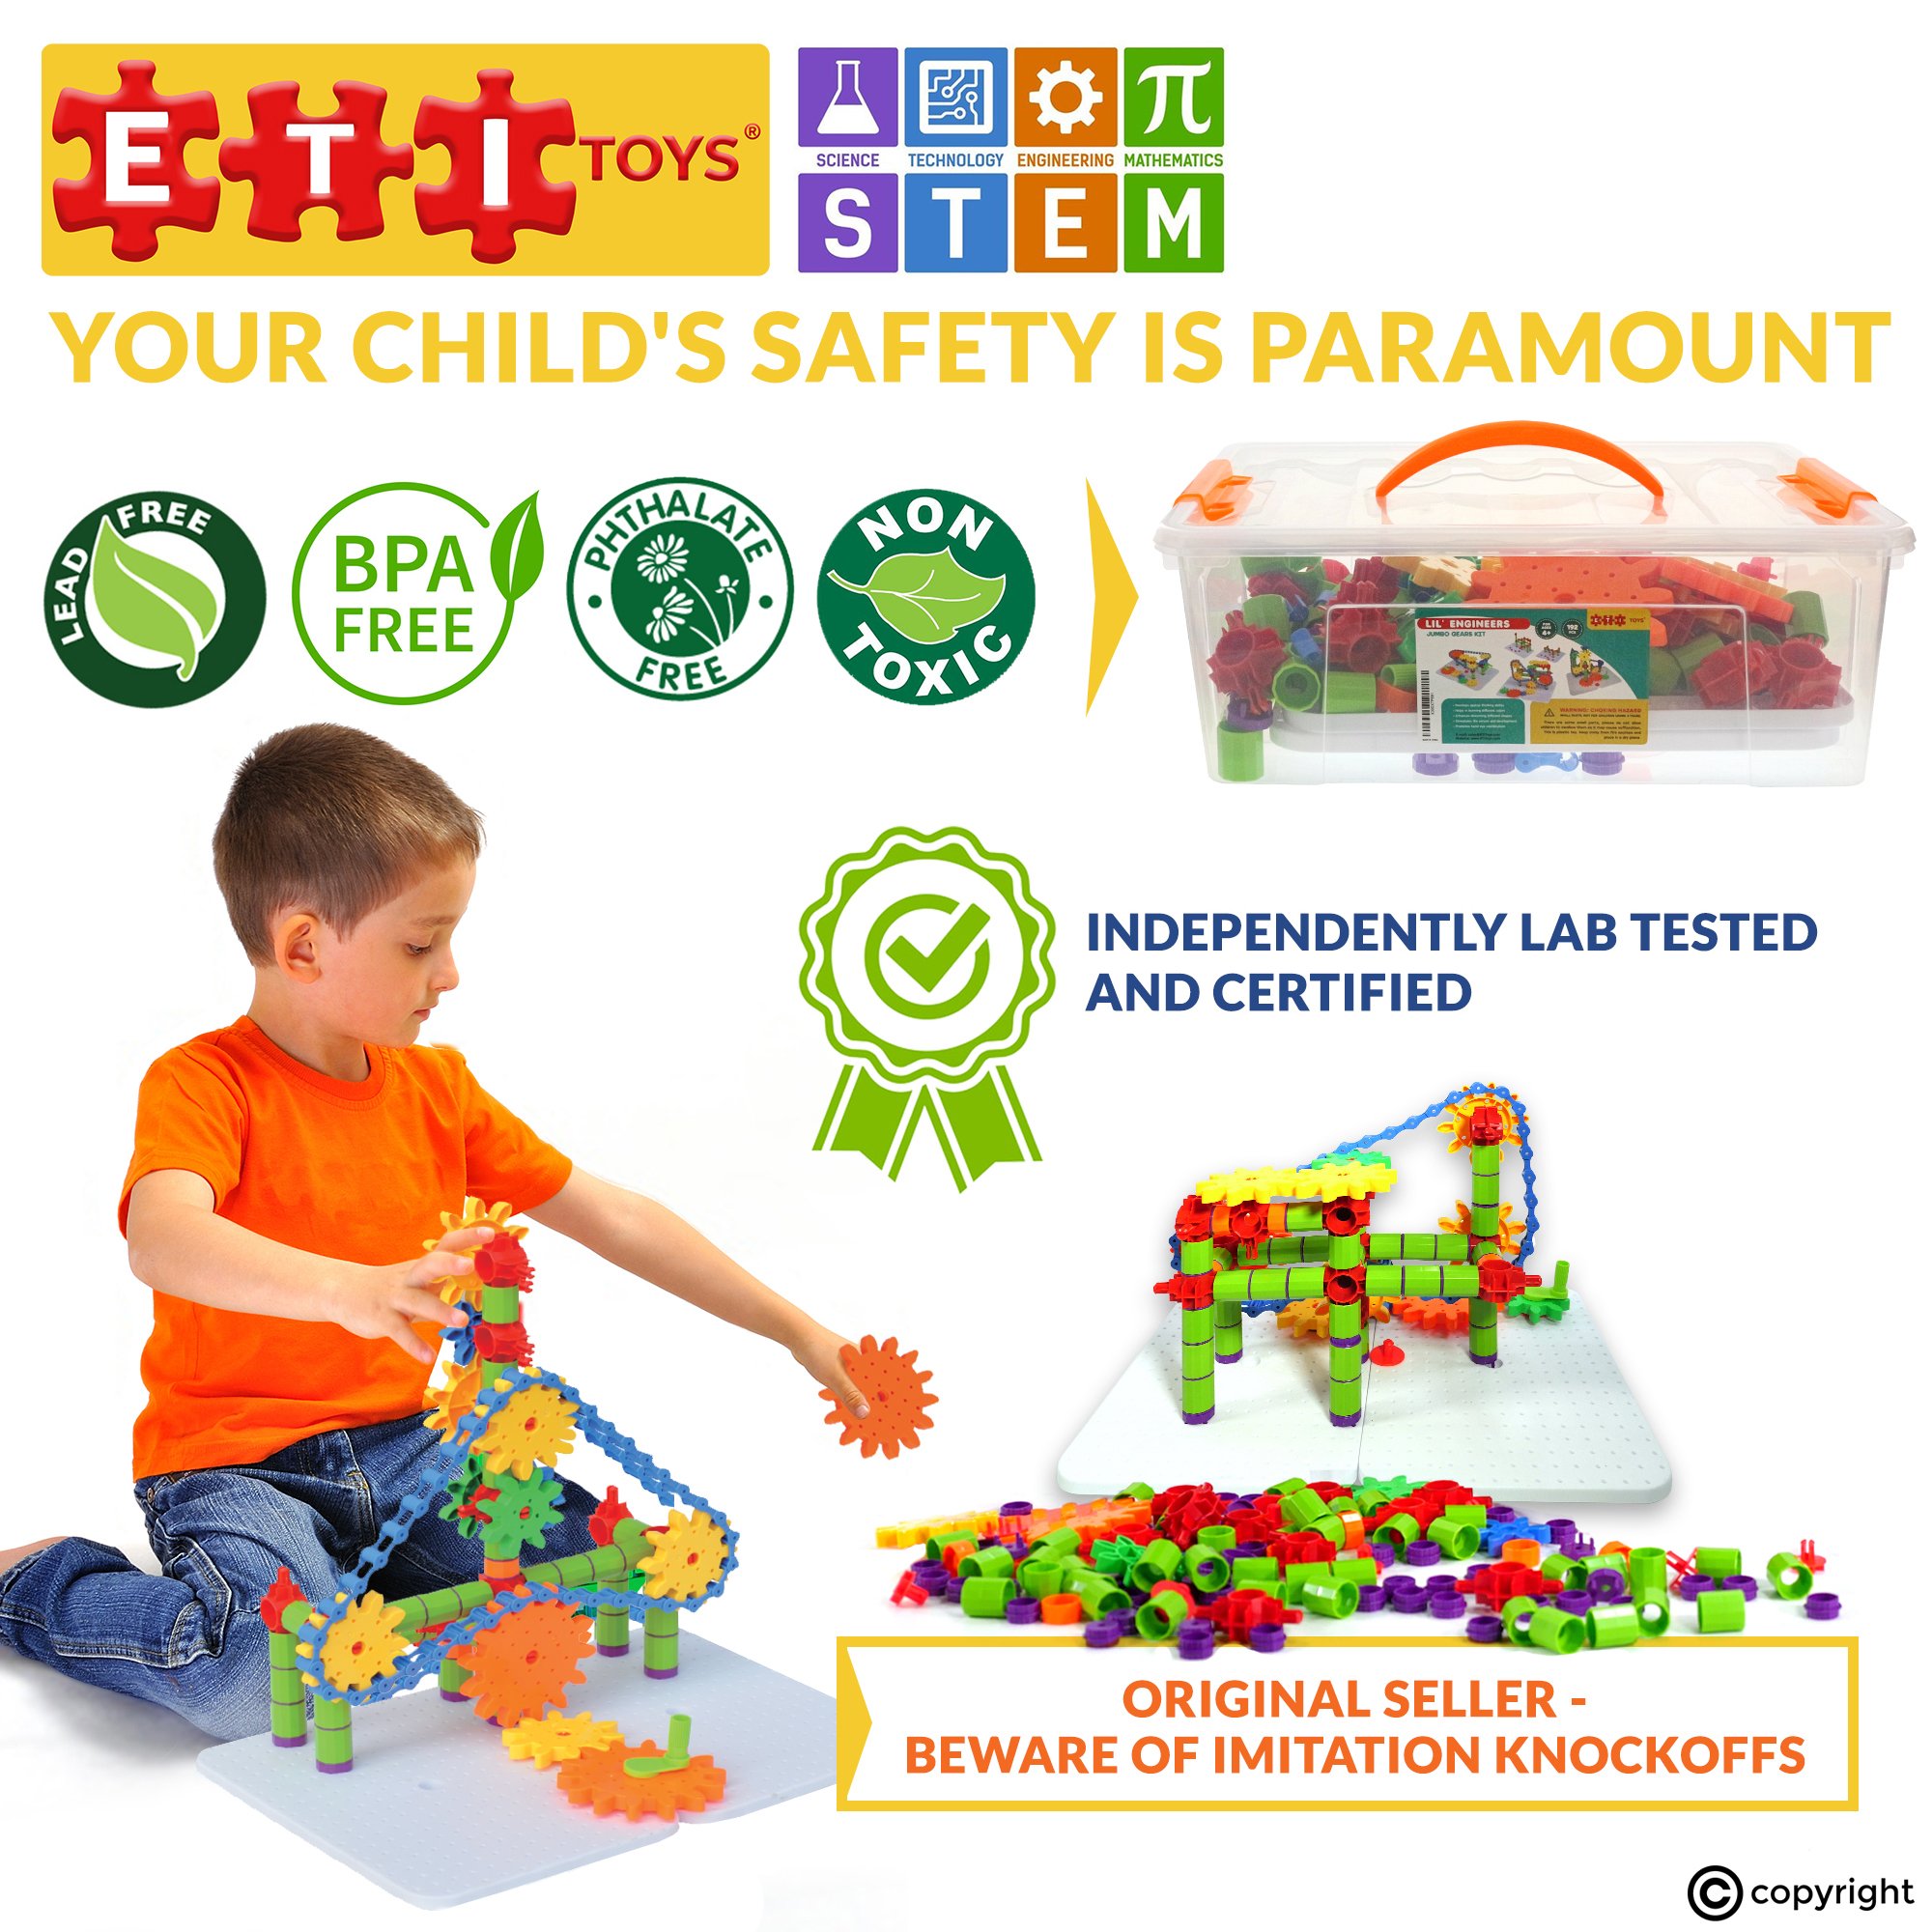 ETI Toys | STEM Learning | 192 Piece Jumbo Gears Set with Resizeable Interlocking Chain, Connector Pieces and 2 Pegboards; Build Endless Designs! Best Gift, Toy for 3, 4, 5 Year Old Boys and Girls.